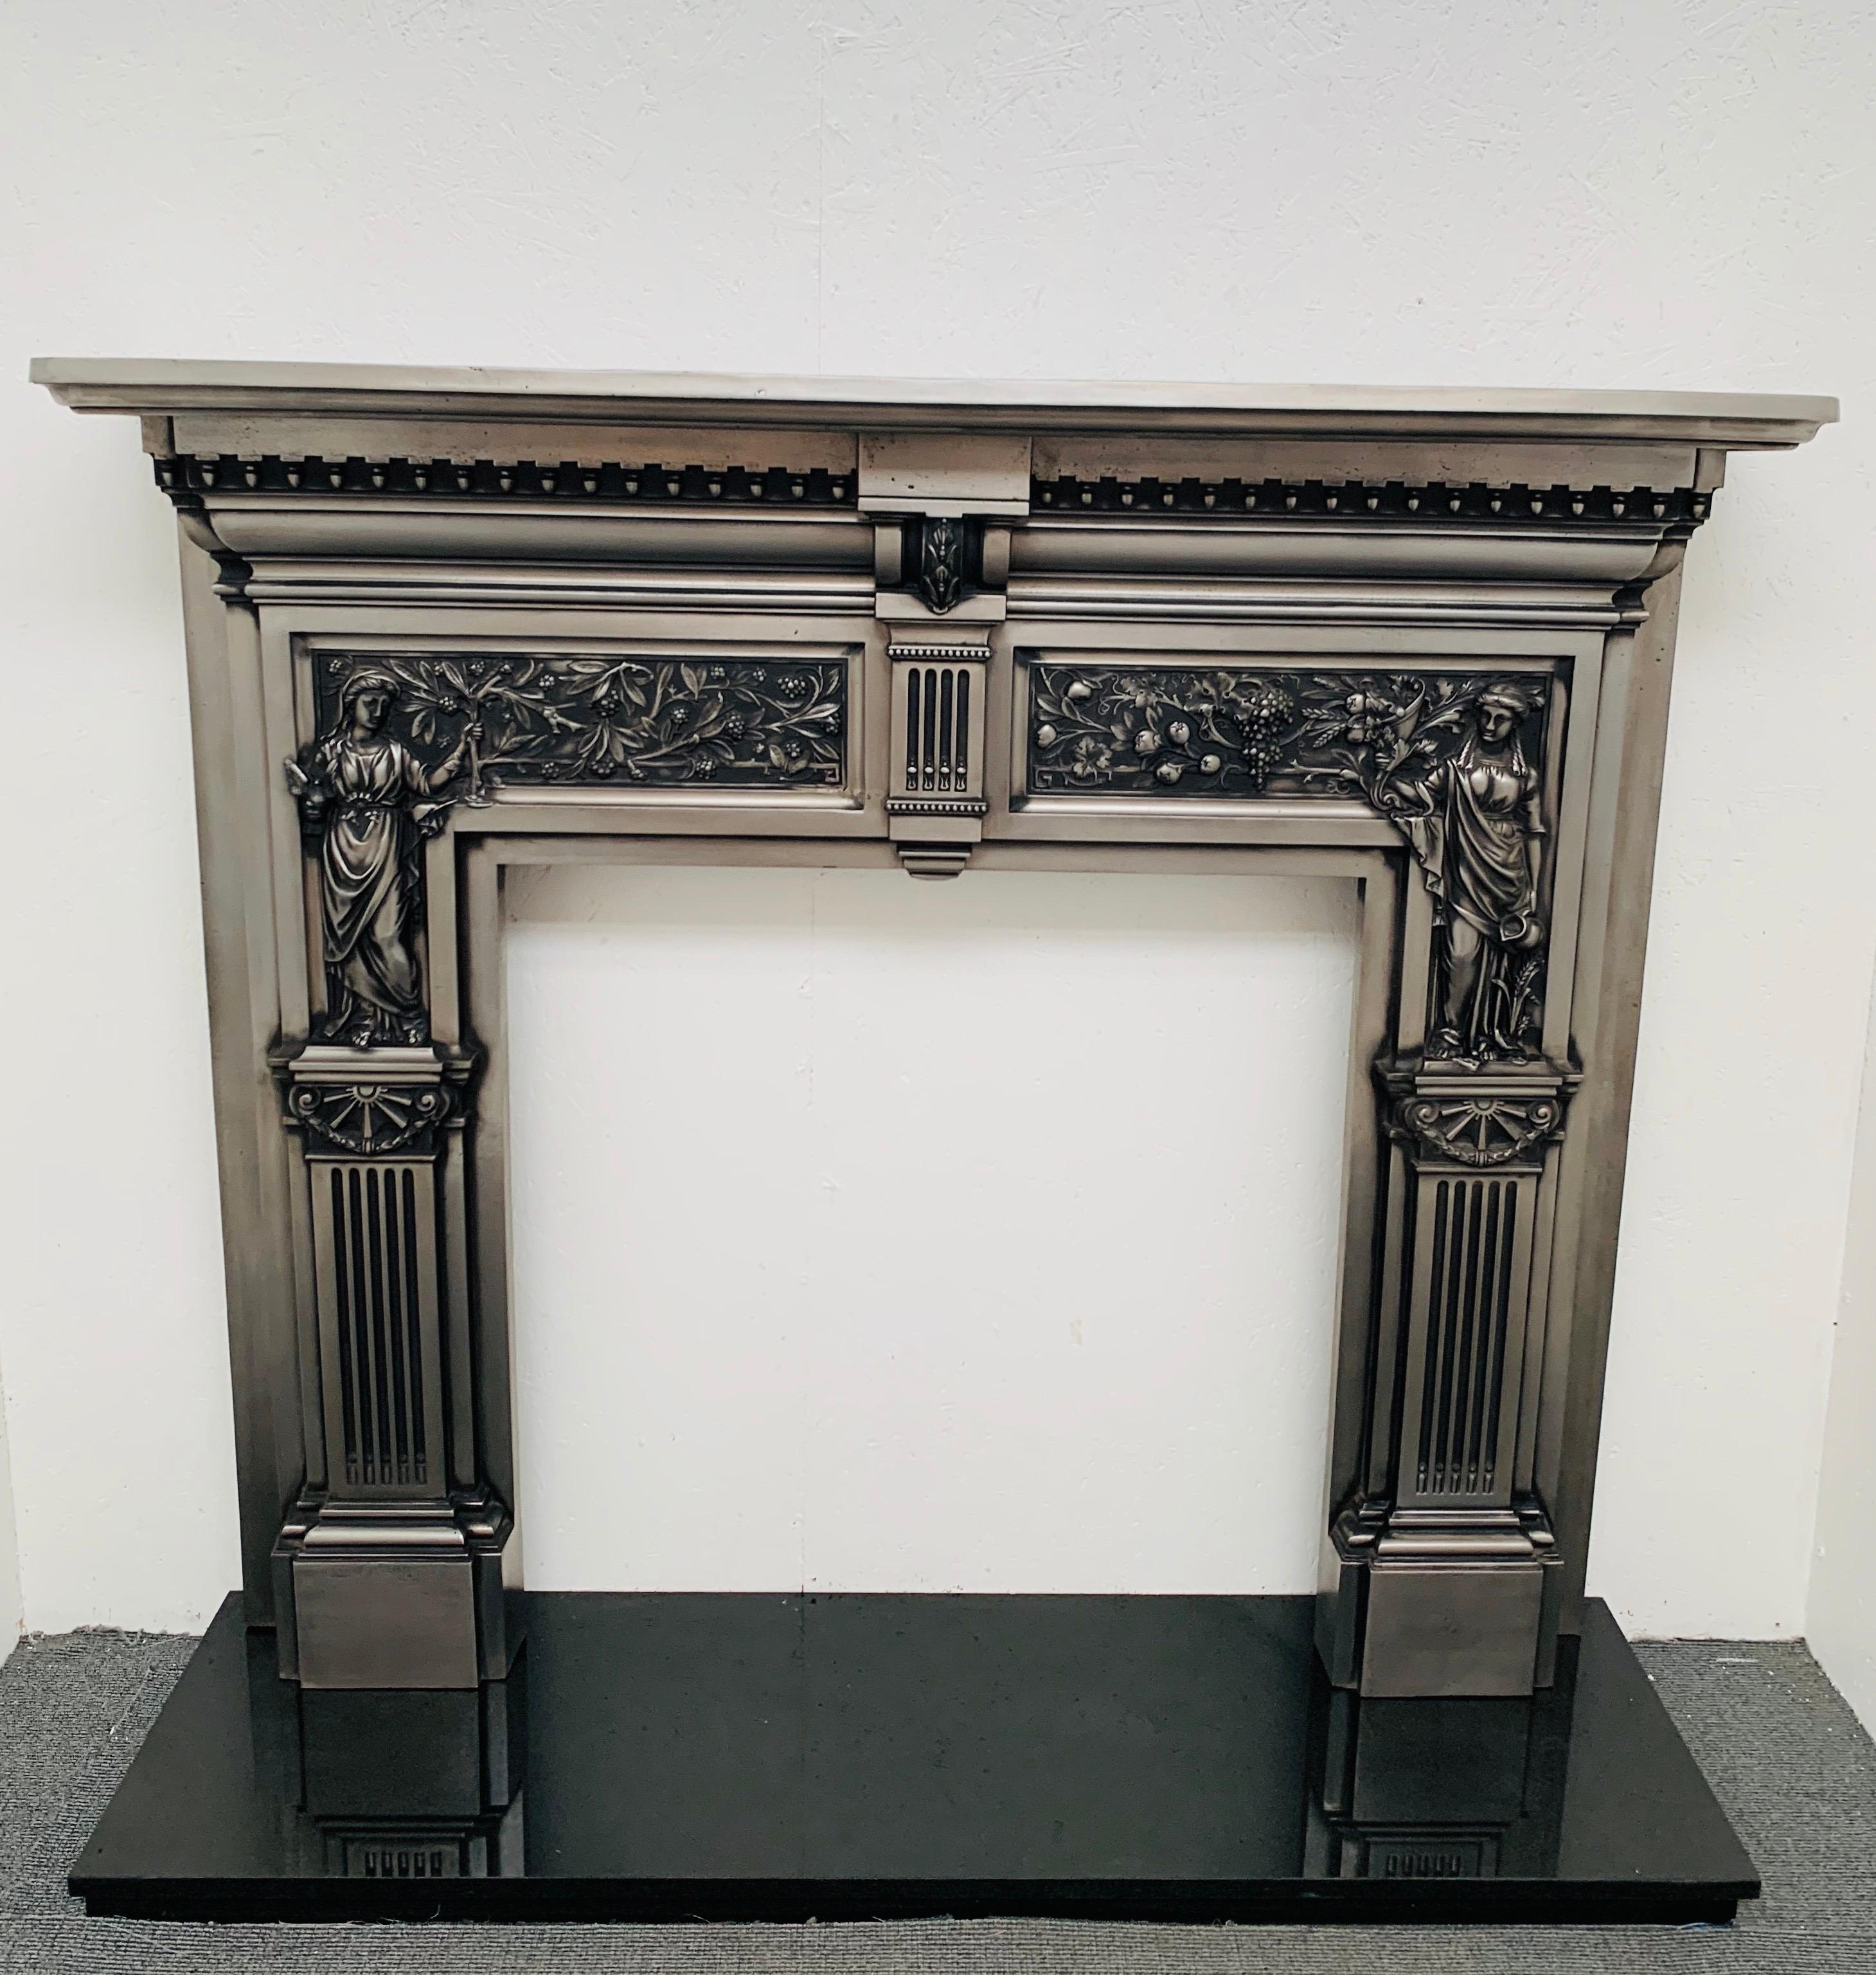 This truly magnificent original peace and plenty fireplace mantelpiece exemplifies the craftmans approach to quality iron casting of its age. This ornate period design incorporates two classic allegorical figures – Peace holding an olive branch and